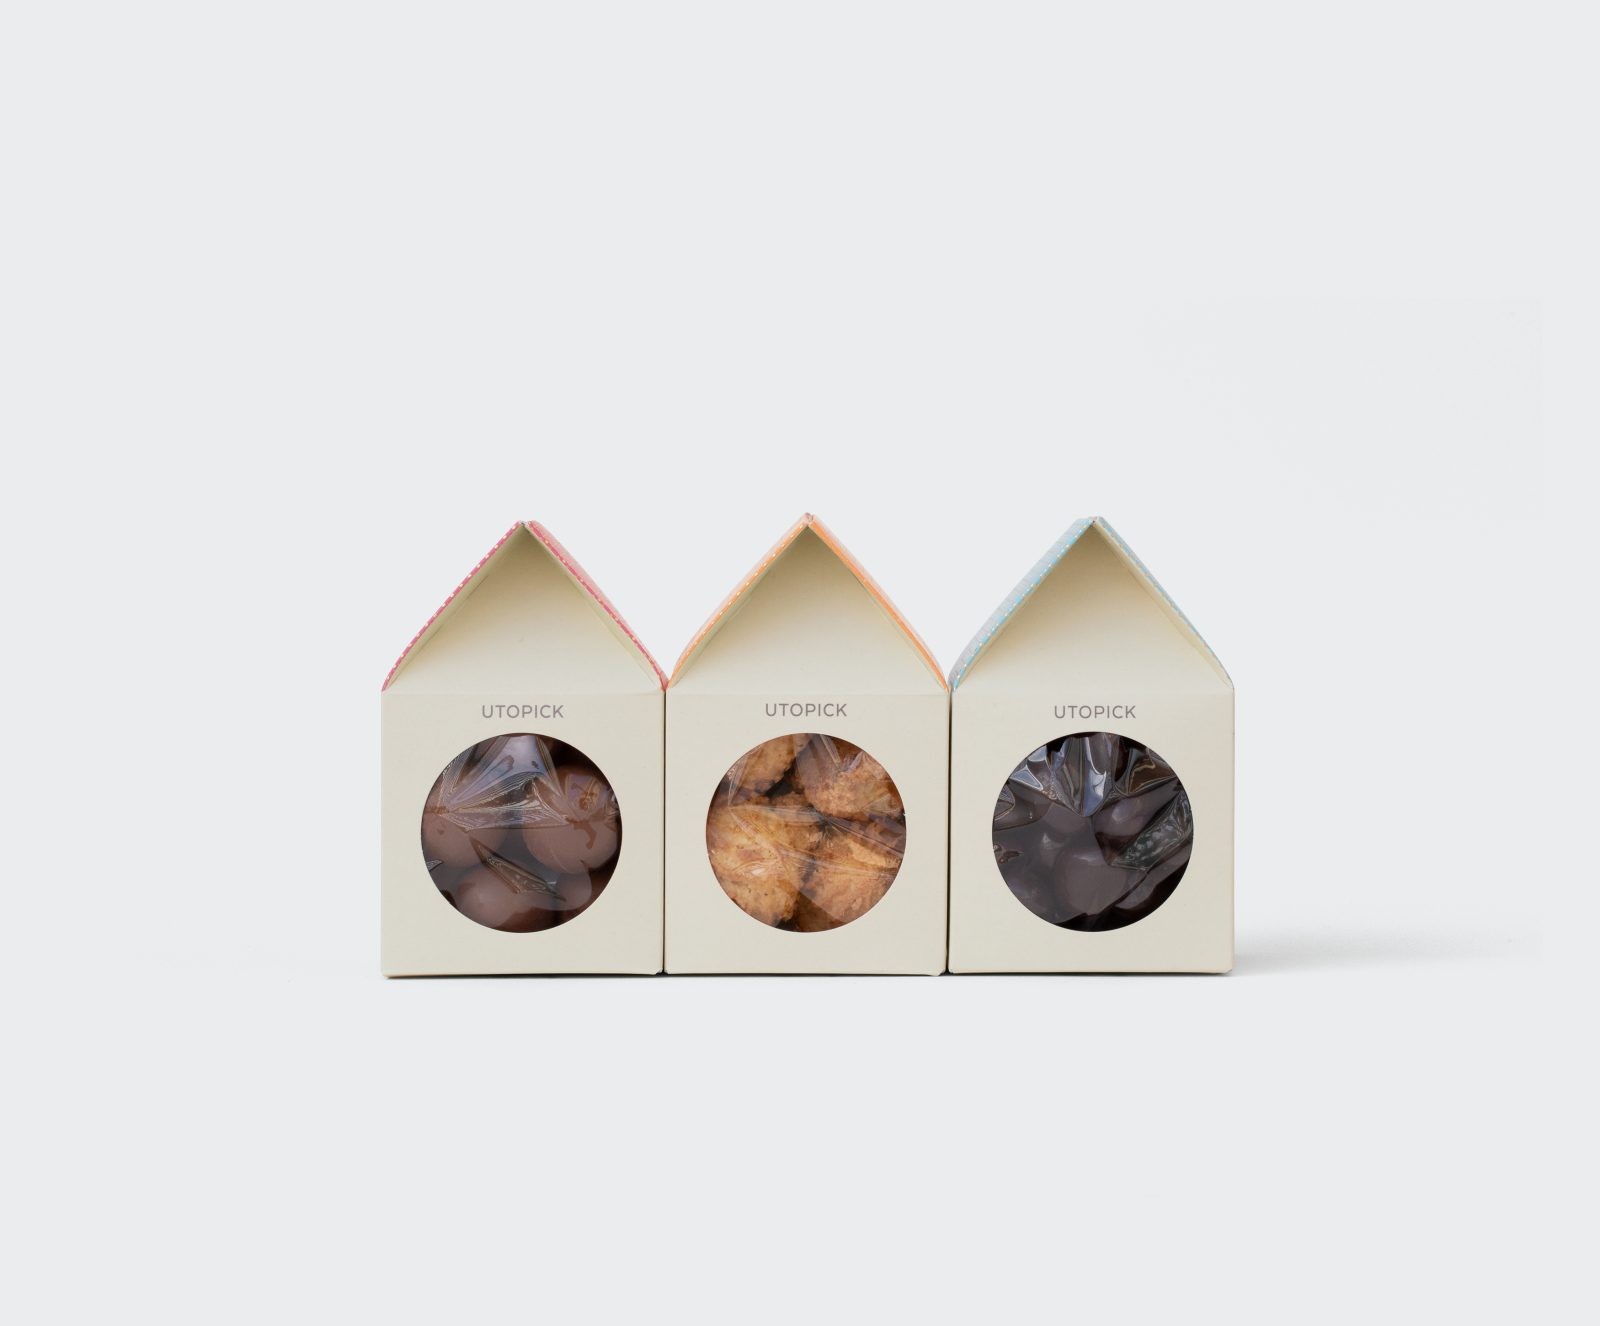 Utopick Houses Packaging Design by Lavernia & Cienfuegos